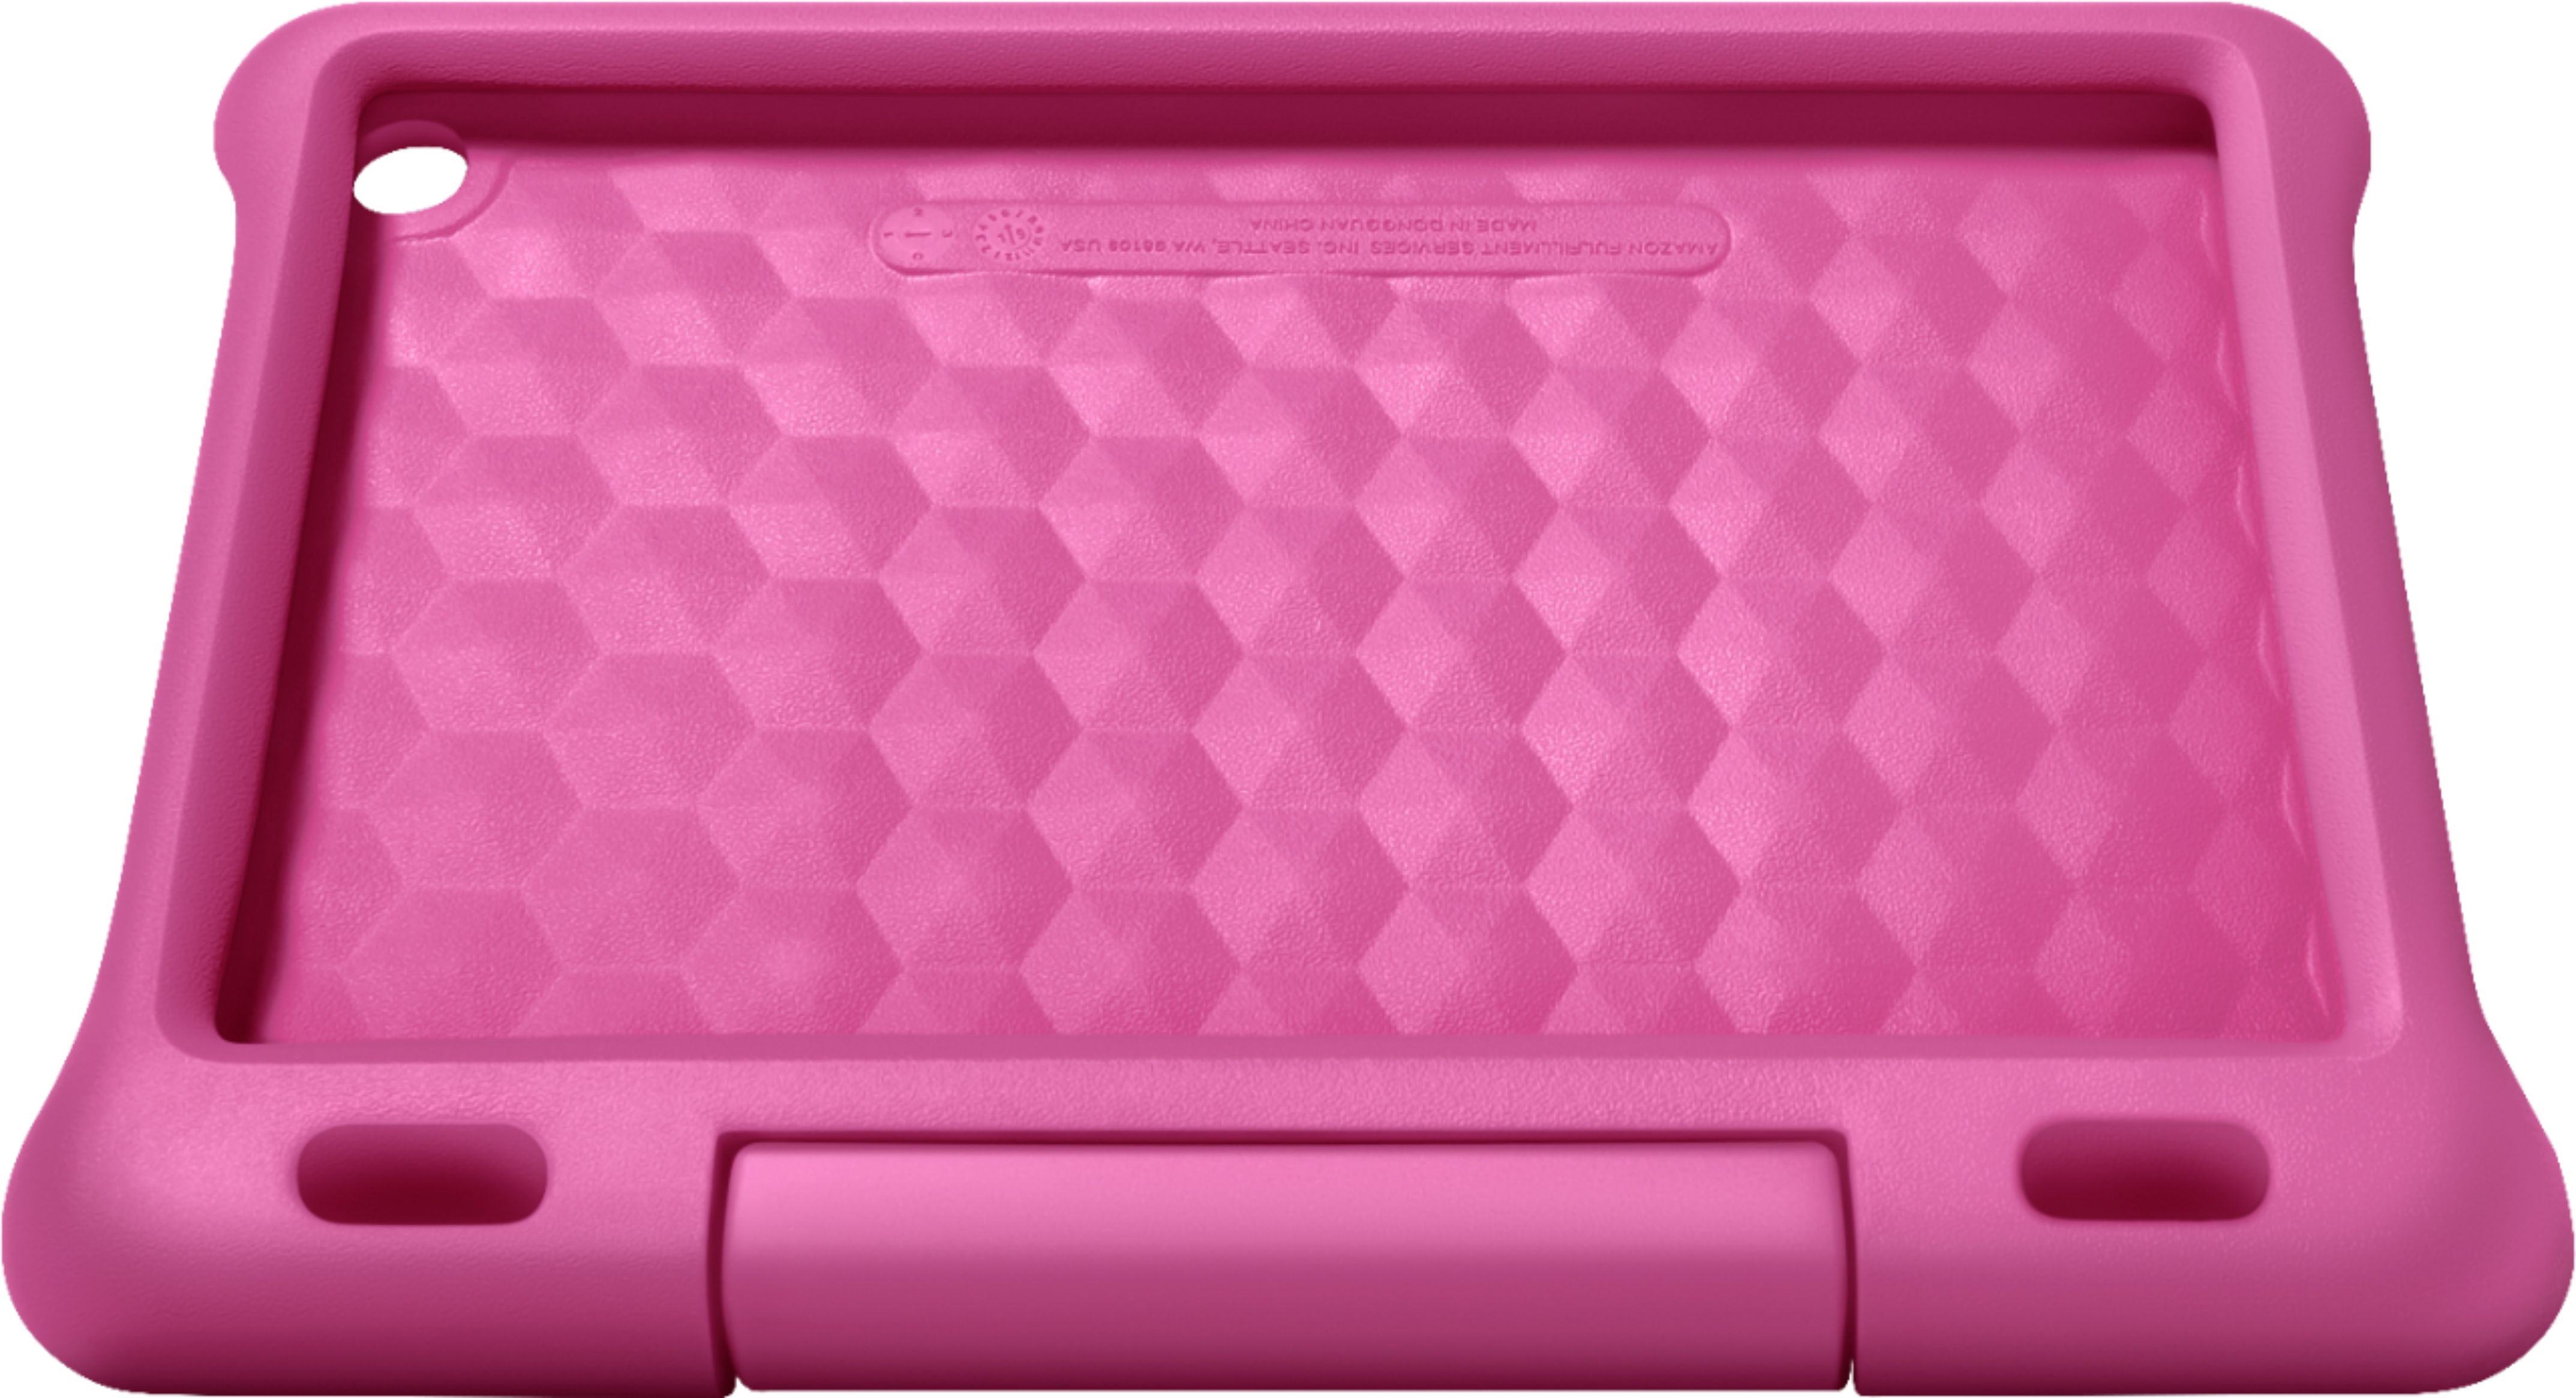 Kid-Proof Case for Amazon Fire HD 10 (7th and 9th Generations - 2017 and 2019 Releases) - Pink